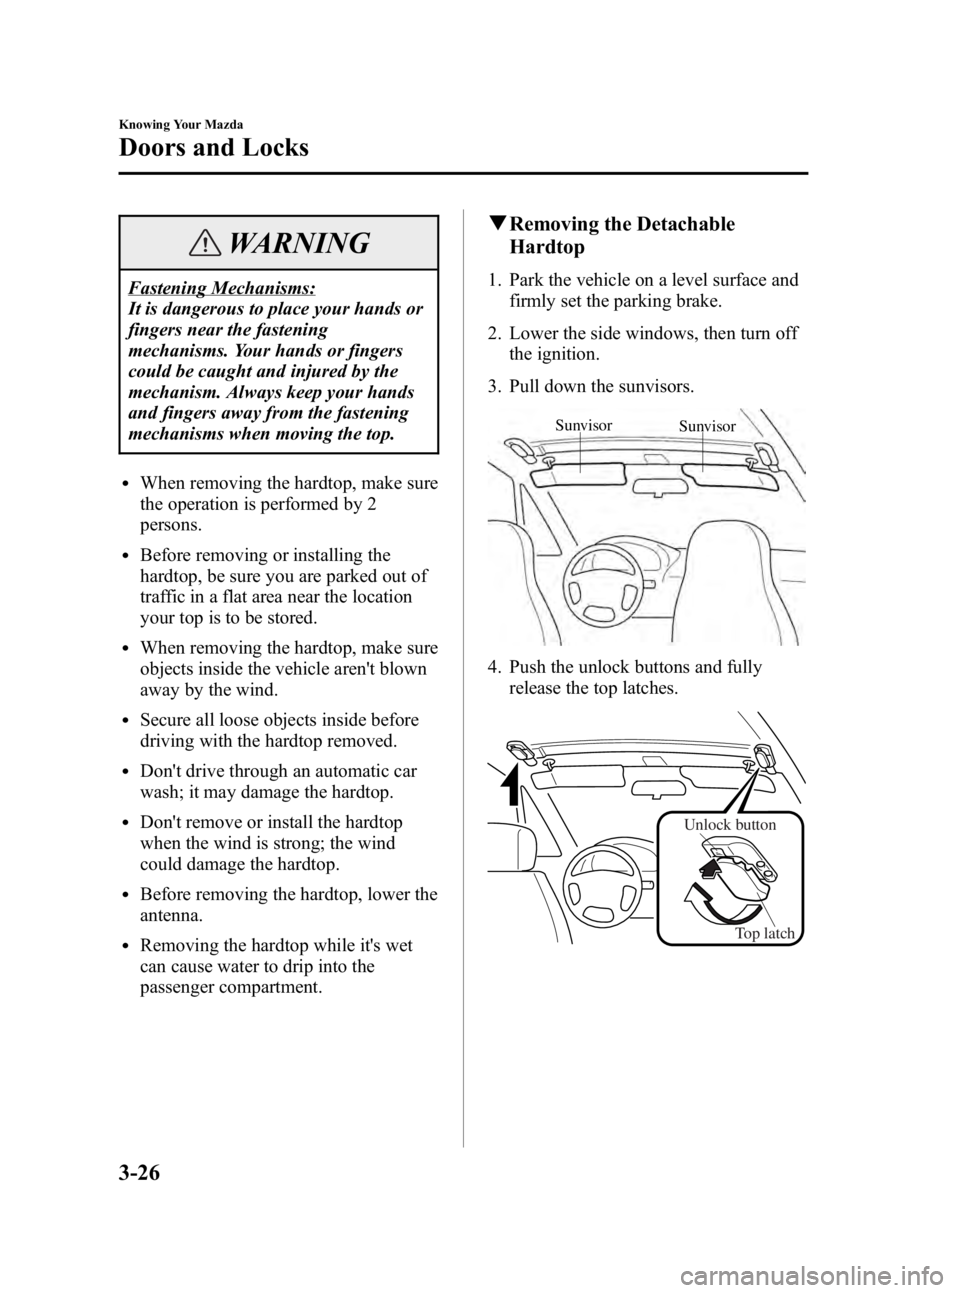 MAZDA MODEL MX-5 MIATA 2005  Owners Manual Black plate (68,1)
WARNING
Fastening Mechanisms:
It is dangerous to place your hands or
fingers near the fastening
mechanisms. Your hands or fingers
could be caught and injured by the
mechanism. Alway